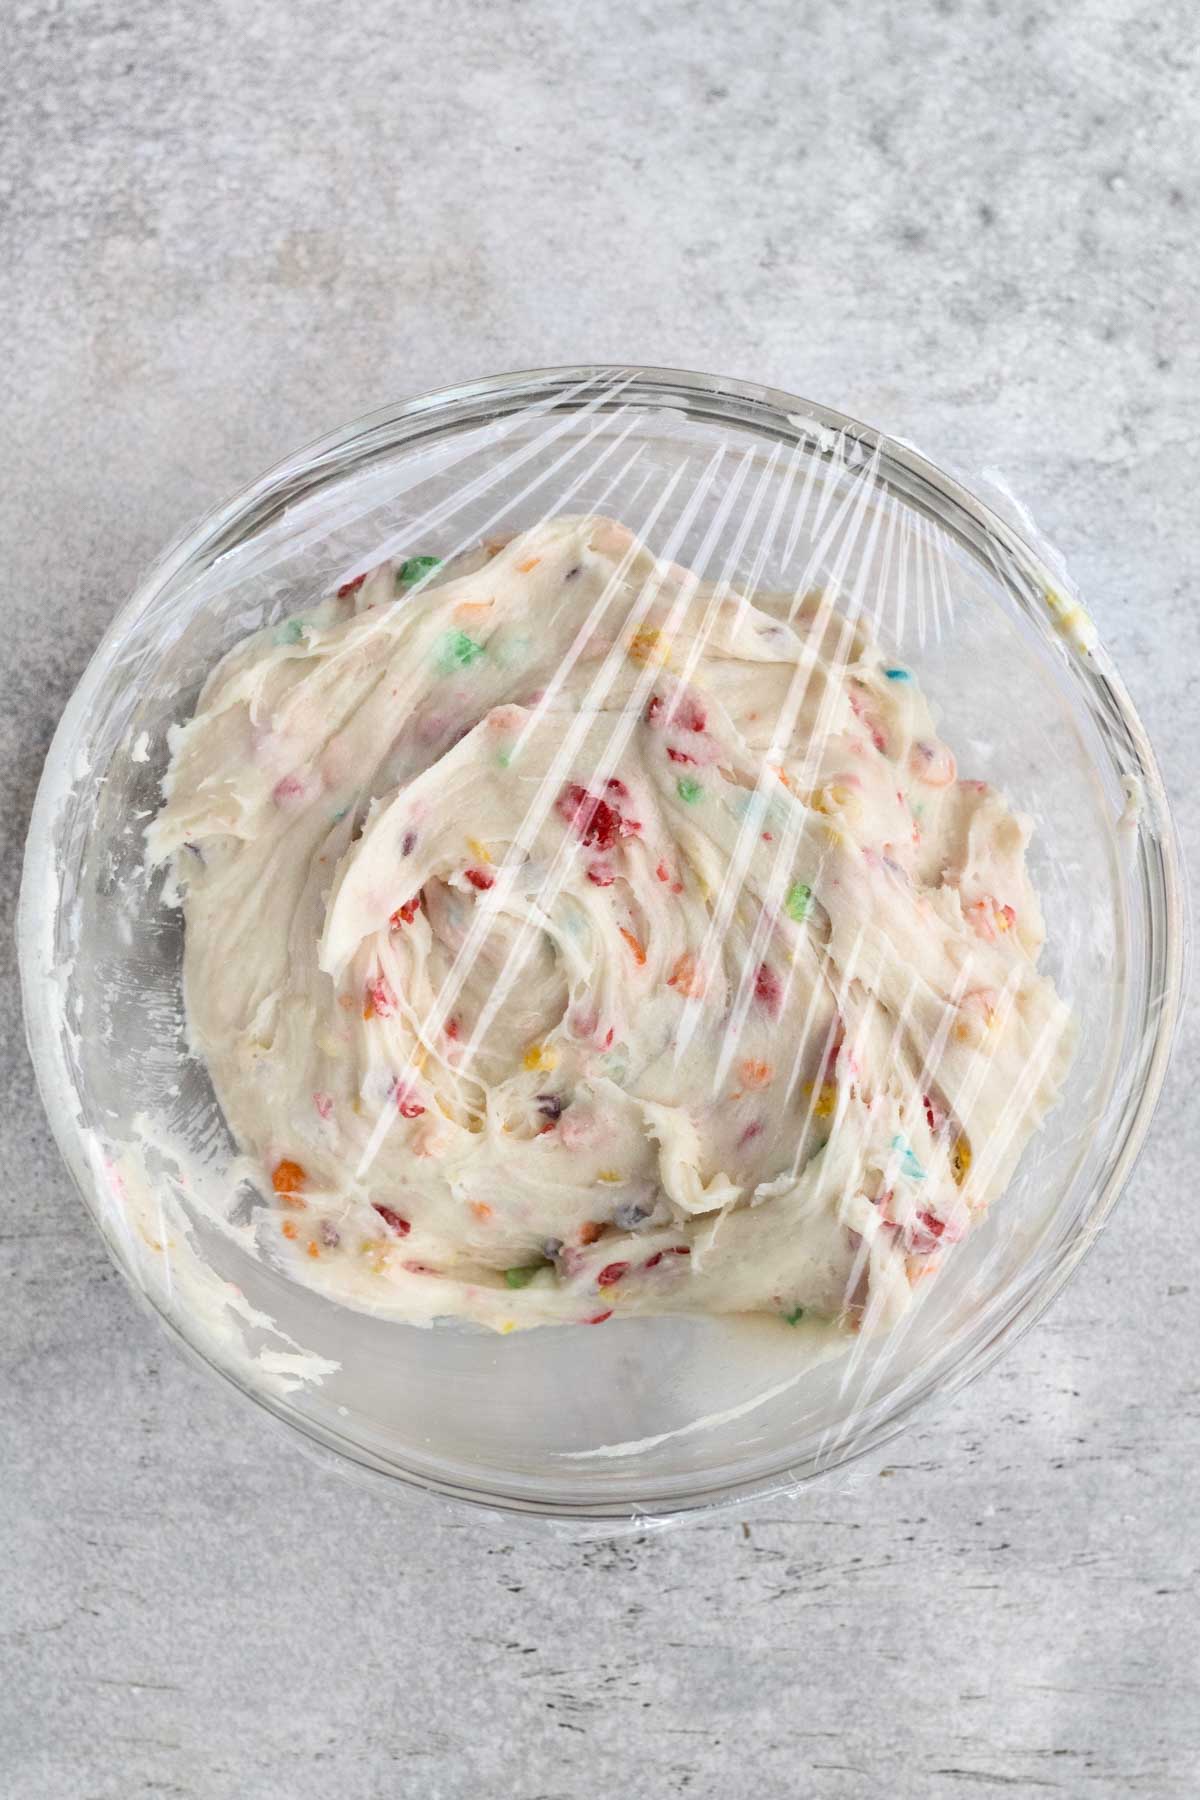 Covering the fruity pebbles cookie batter with plastic wrap in a bowl.